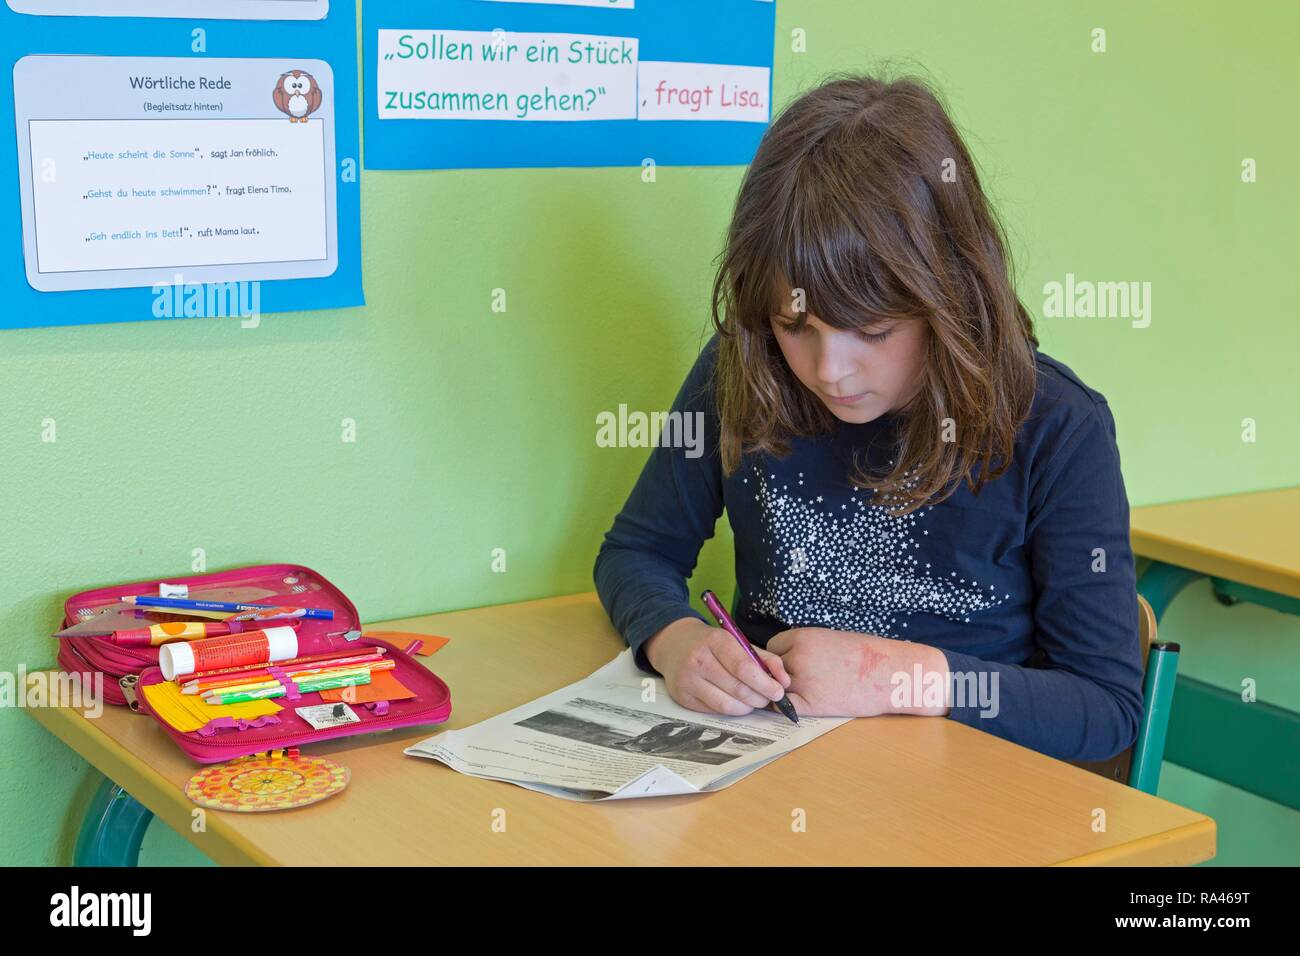 Student, girl writing on the podium in classroom, German lessons, primary school, Lower Saxony, Germany Stock Photo